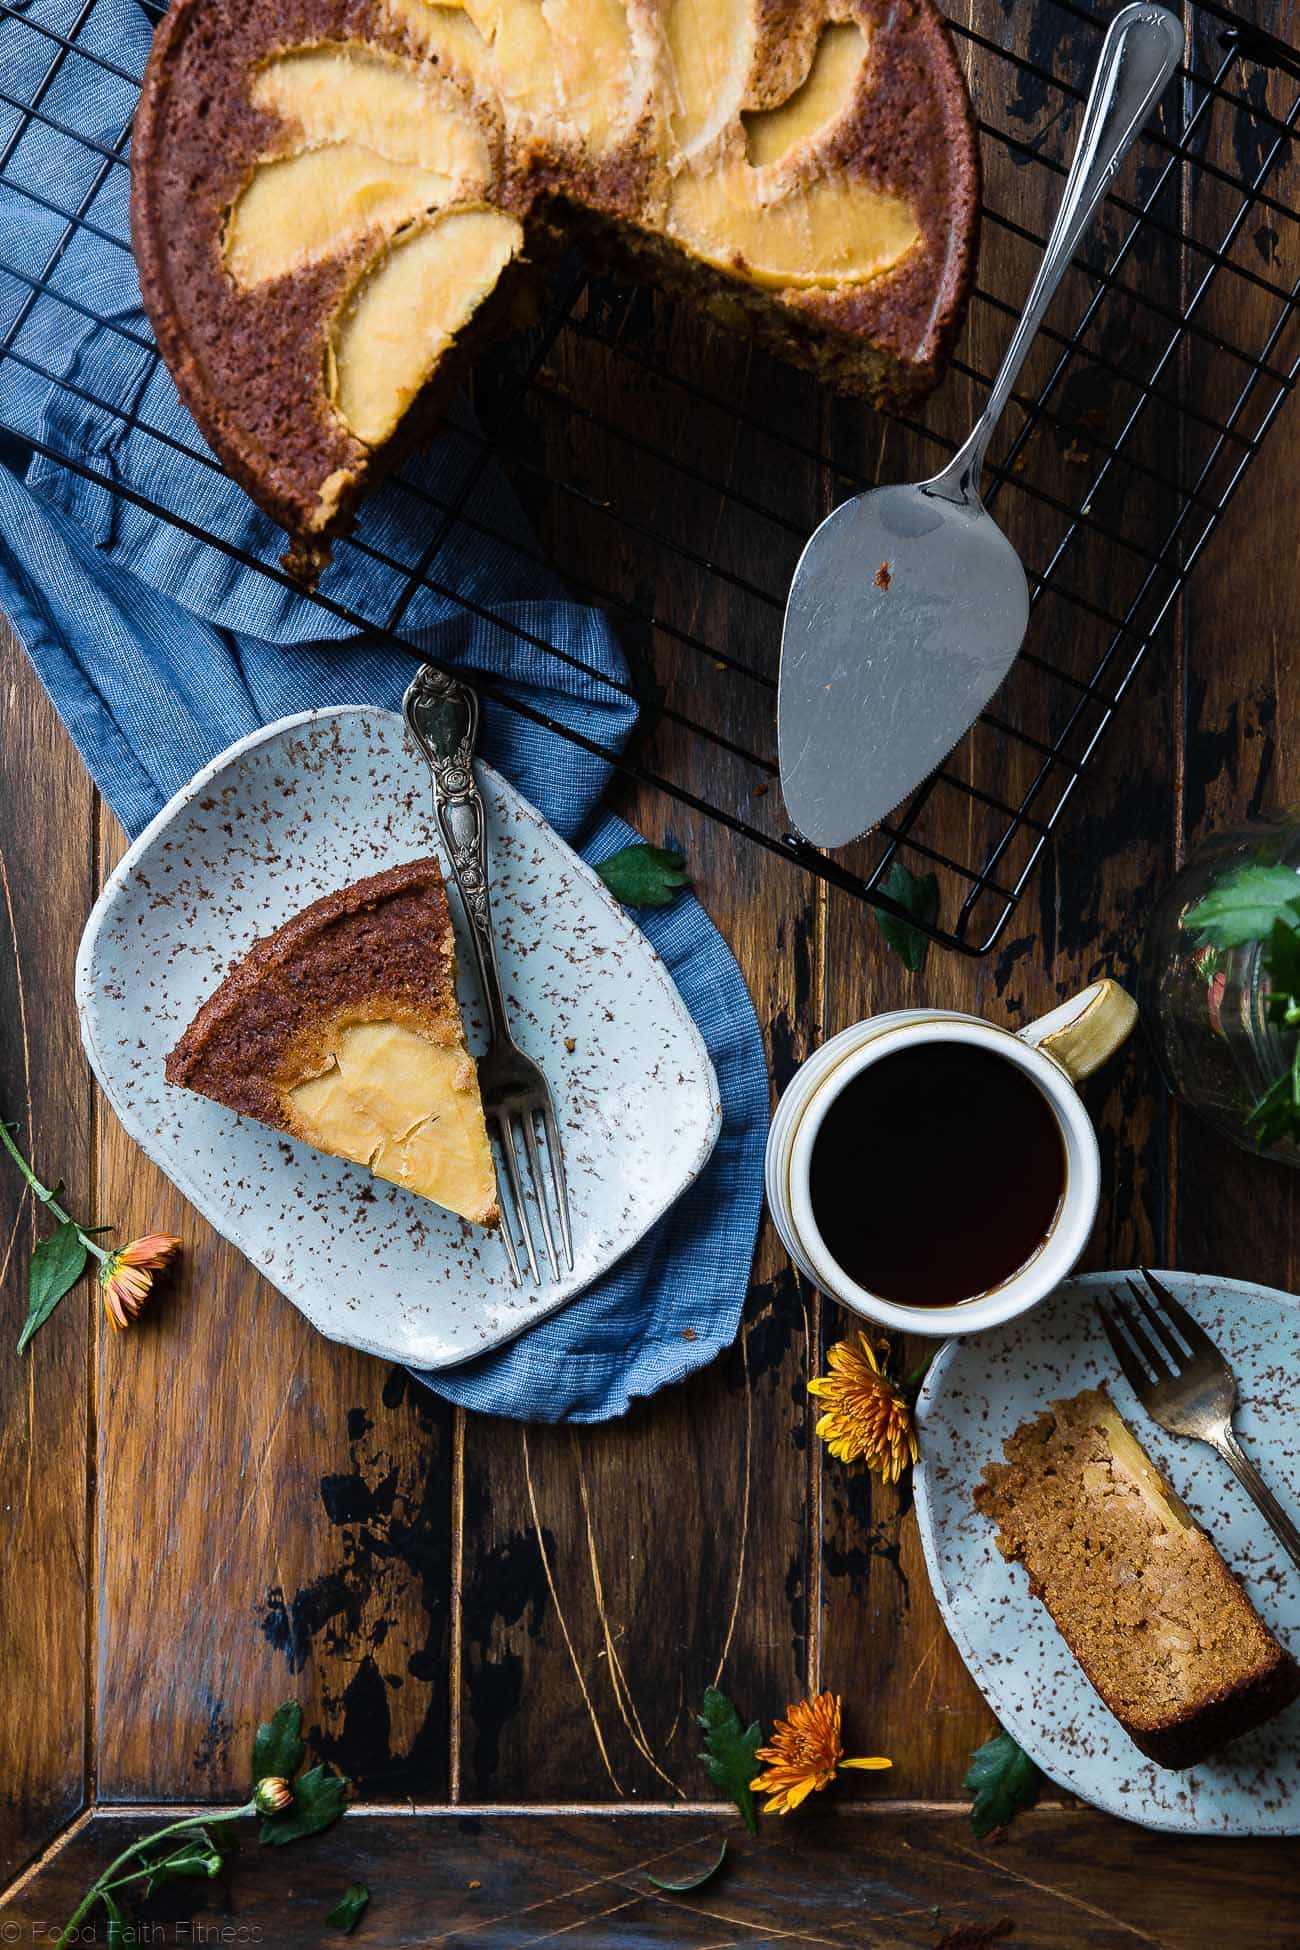 Gluten Free Apple Cinnamon Coffee Cake - This almond flour apple cake is made with almond flour, apples and naturally sweetened with coconut sugar. Its a healthy, paleo and freezer-friendly breakfast that you will never believe is butter and oil free! | Foodfaithfitness.com | @FoodFaithFit